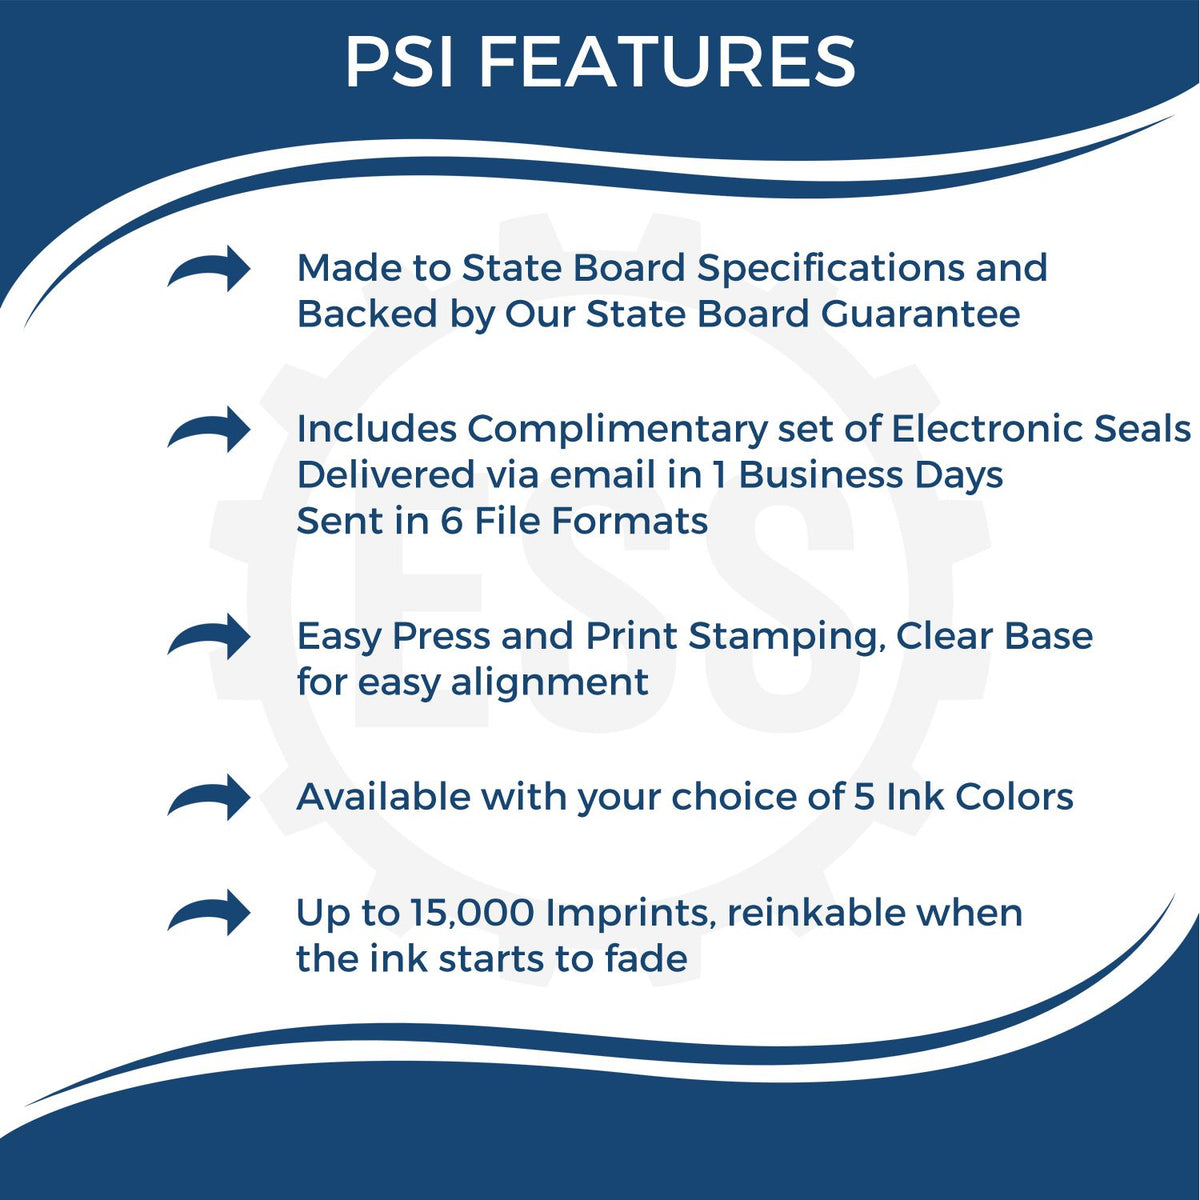 A picture of an infographic highlighting the selling points for the PSI Arizona Notary Stamp